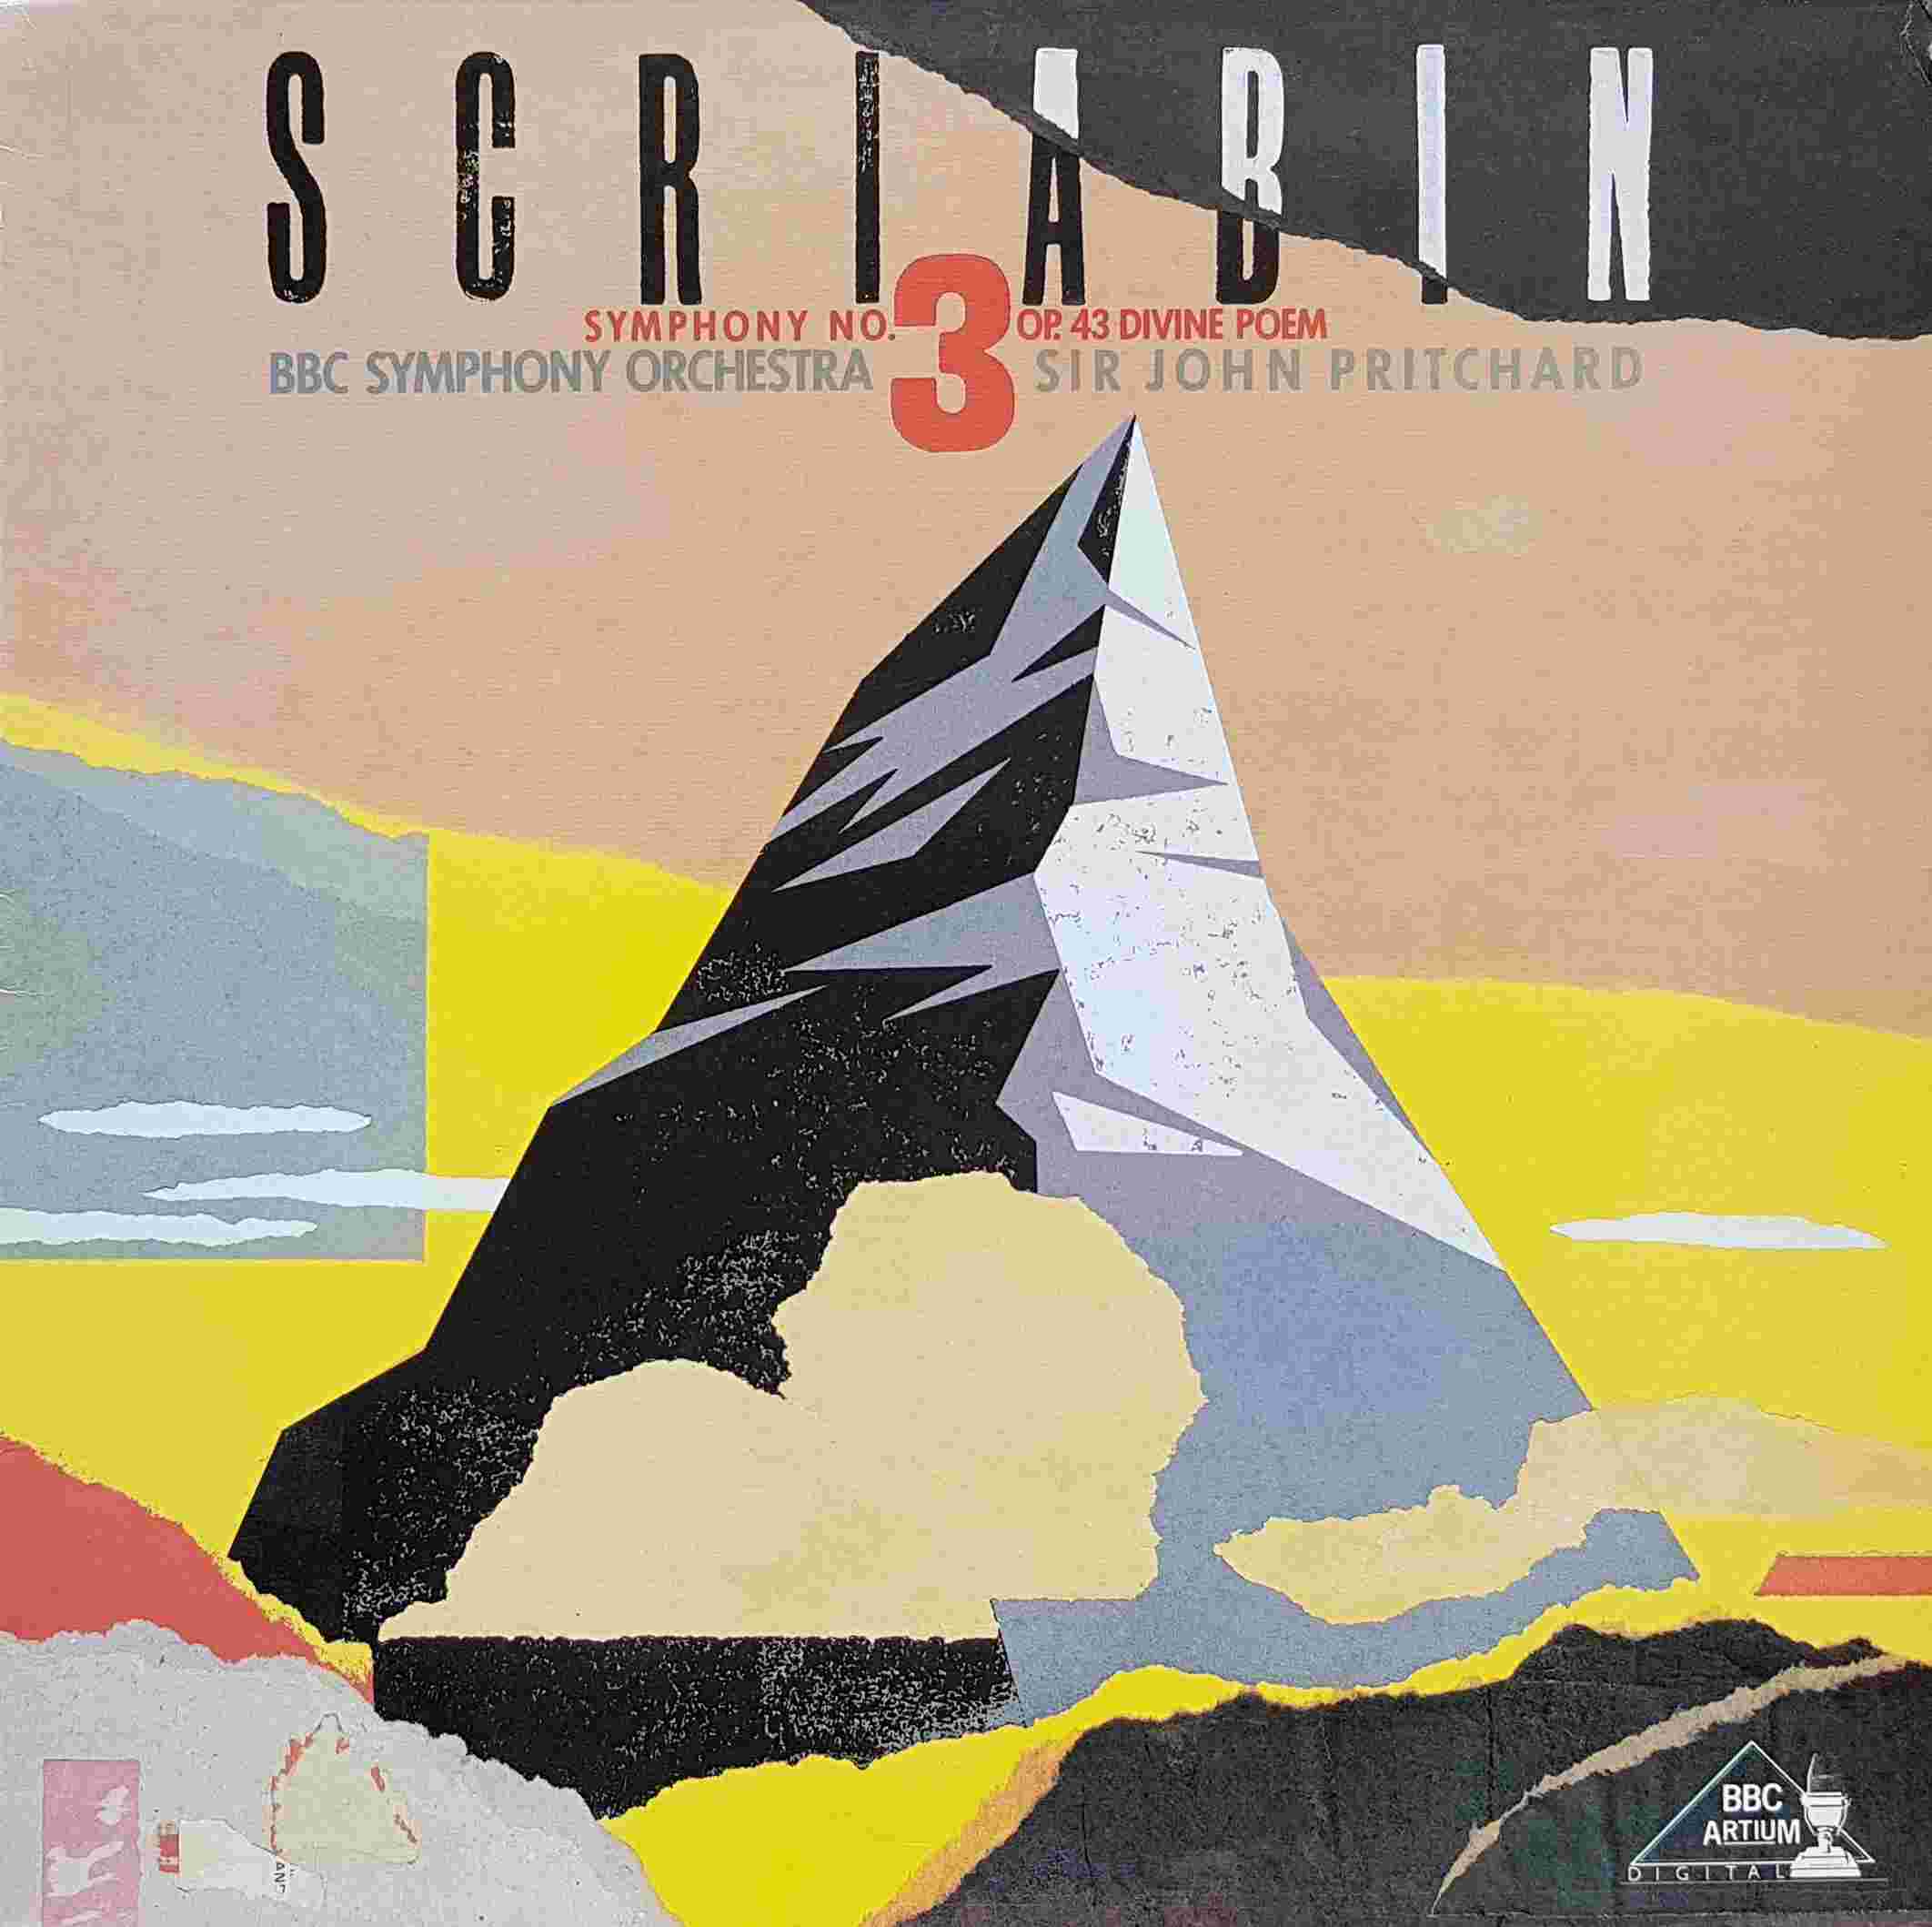 Picture of REGL 520 Scriabin symphony number 3 in C Minor, Op. 43 by artist Alexander Nikolaevich Scriabin / BBC Symphpny Orchestra from the BBC albums - Records and Tapes library